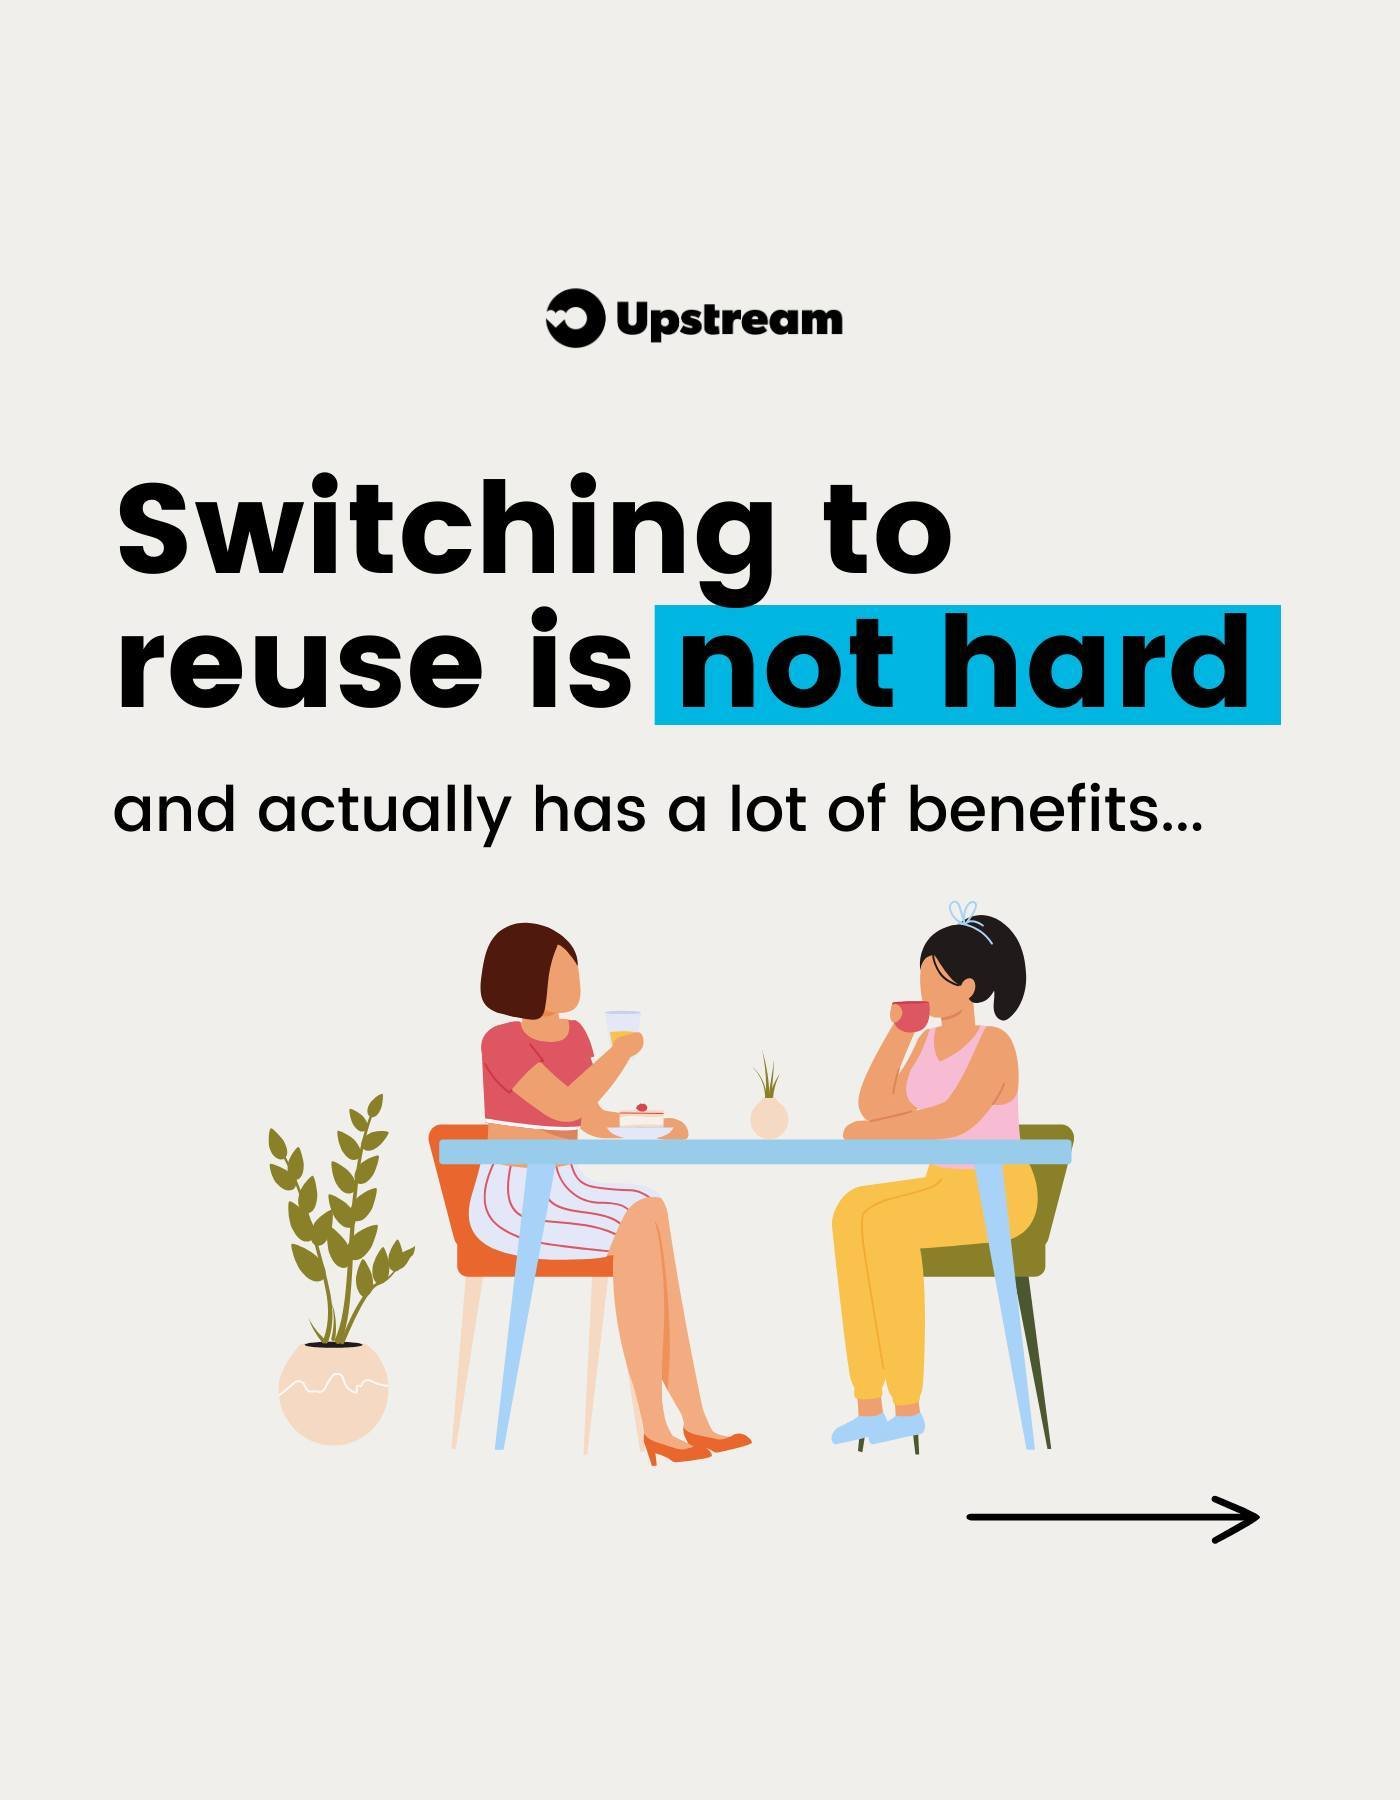 The switch to reuse can seem daunting, that&rsquo;s why we&rsquo;re here to provide helpful insights and highlight the benefits of transitioning to reusable foodware onsite 🙏🍽️

Benefits like&hellip;

➡️ potential cost savings
➡️ less water consump